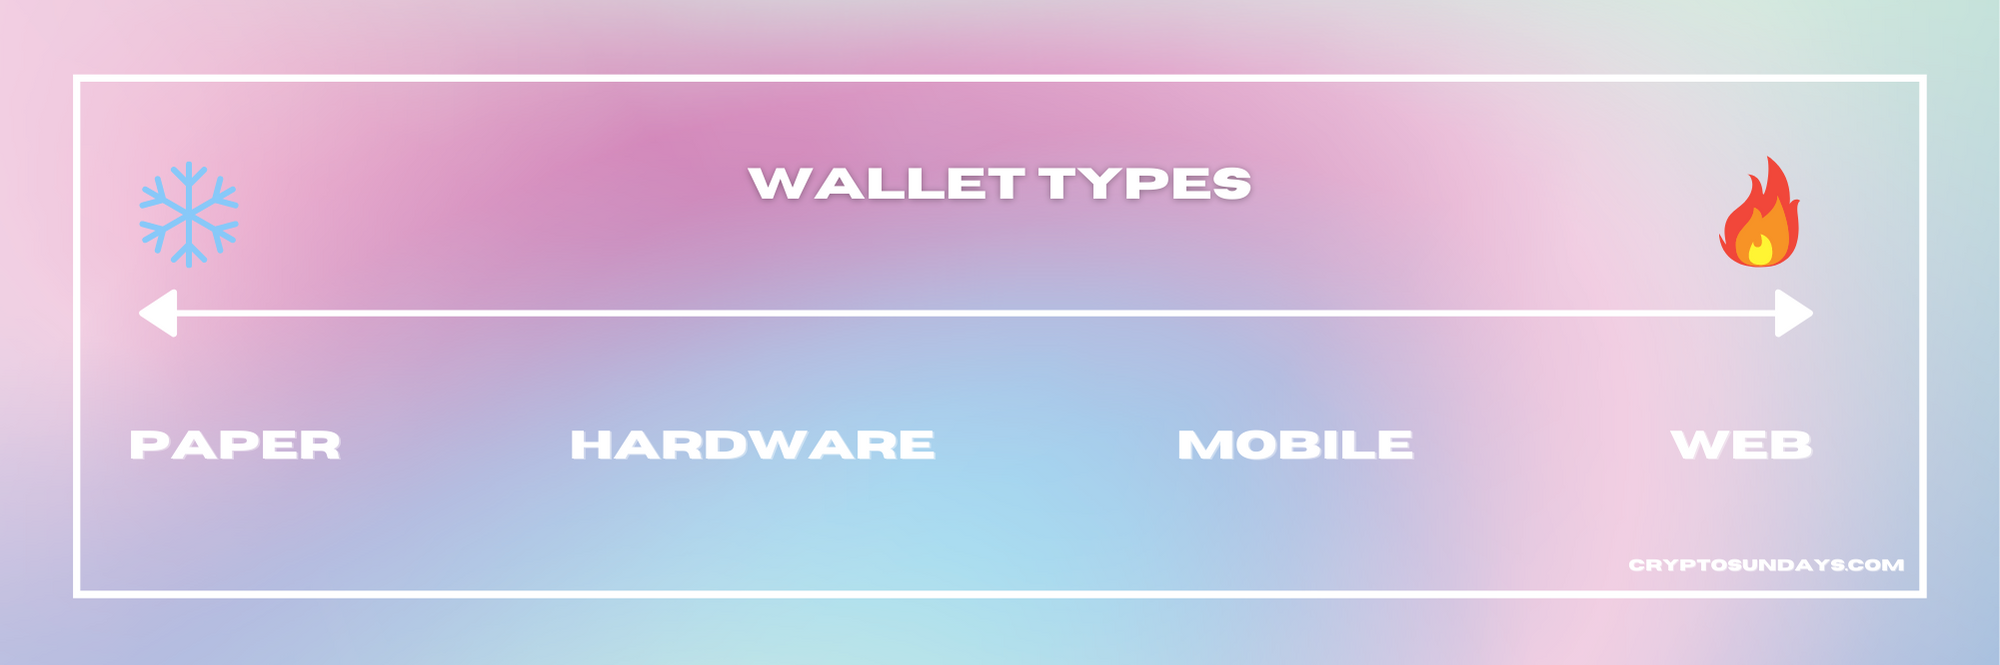 Wallet types range in their temperature, from cold to hot